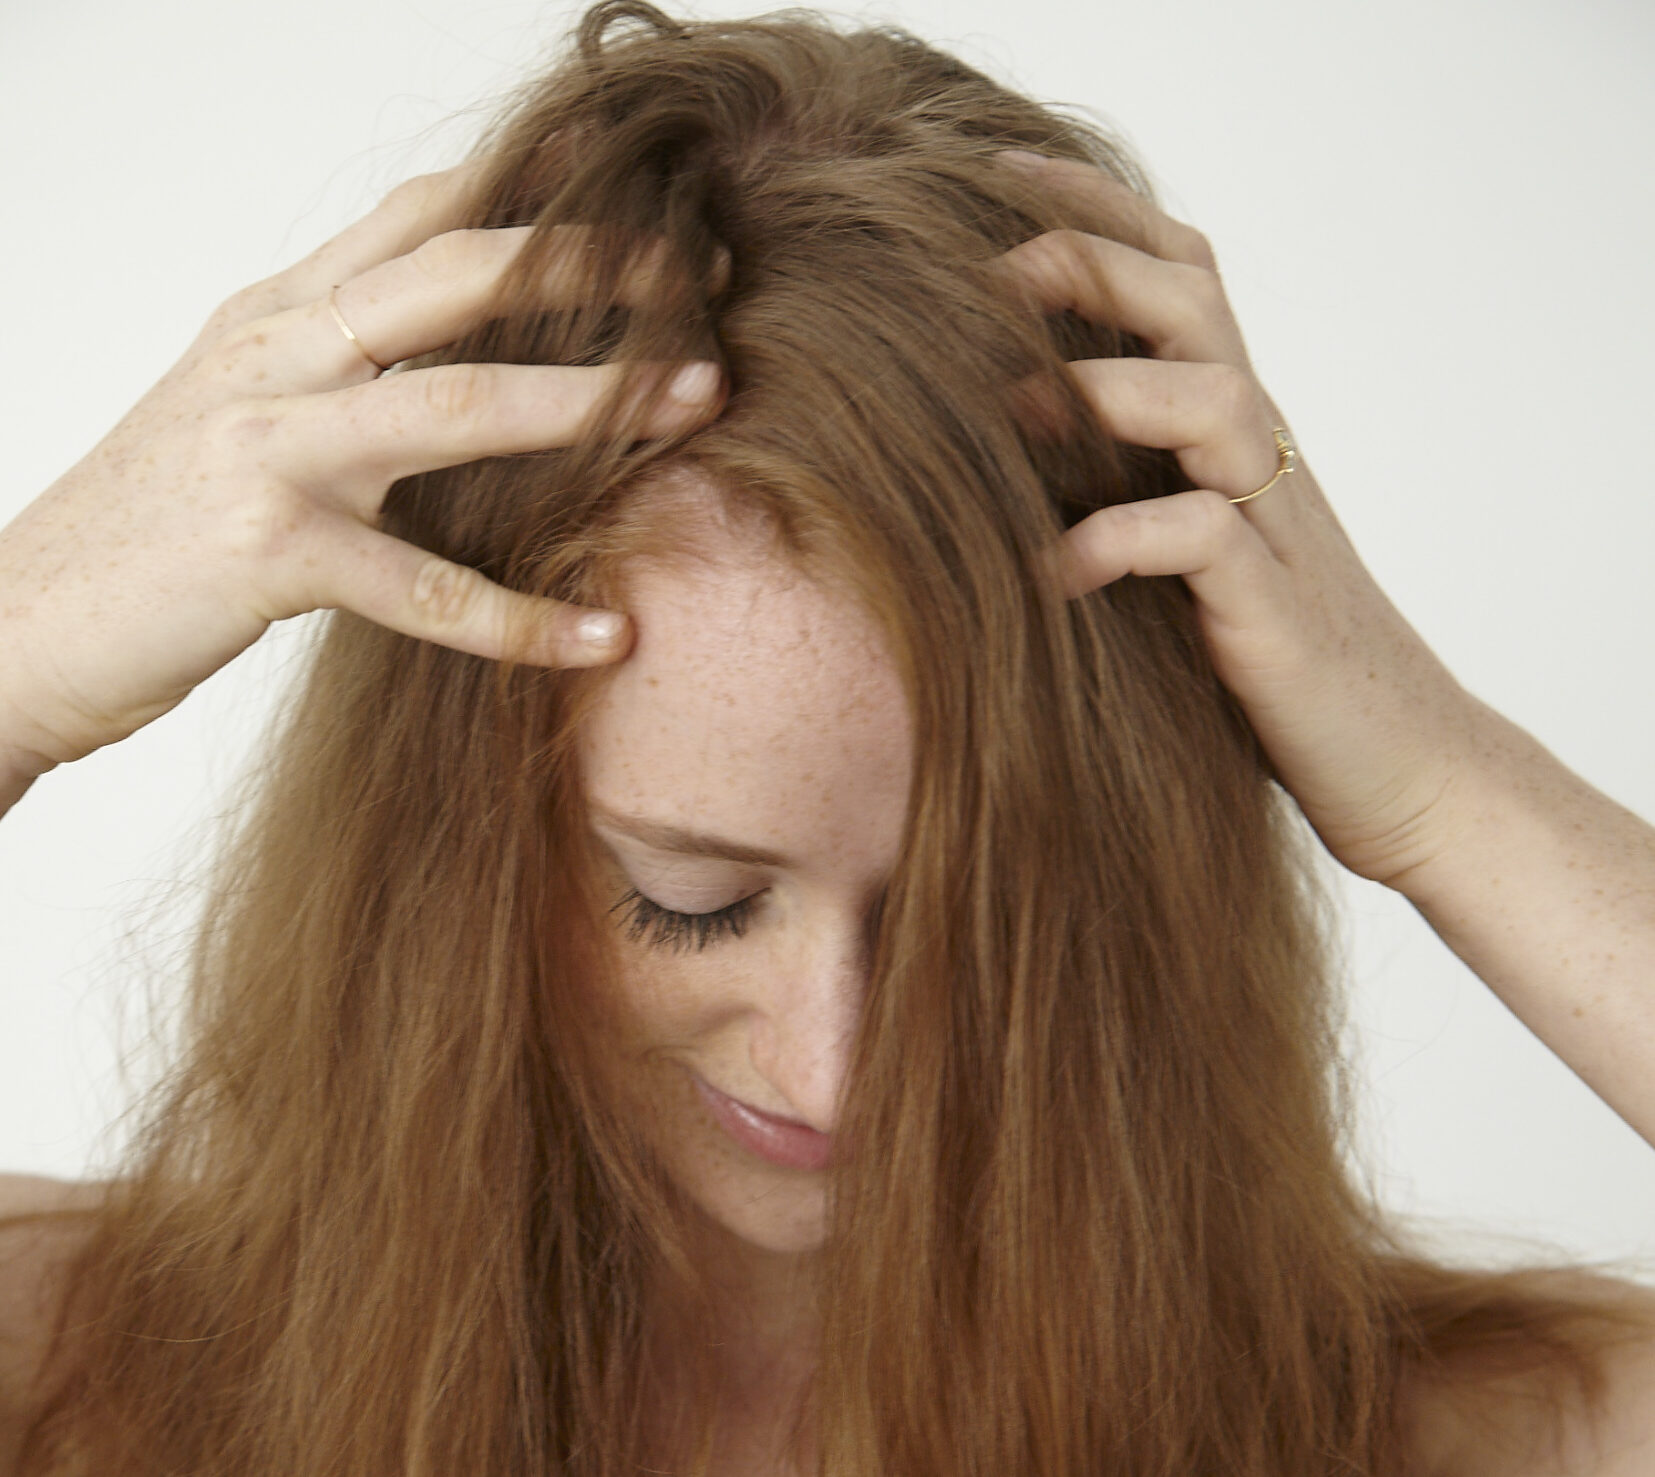 7 Ways Redheads Can Treat a Dry, Flaky Scalp at Home